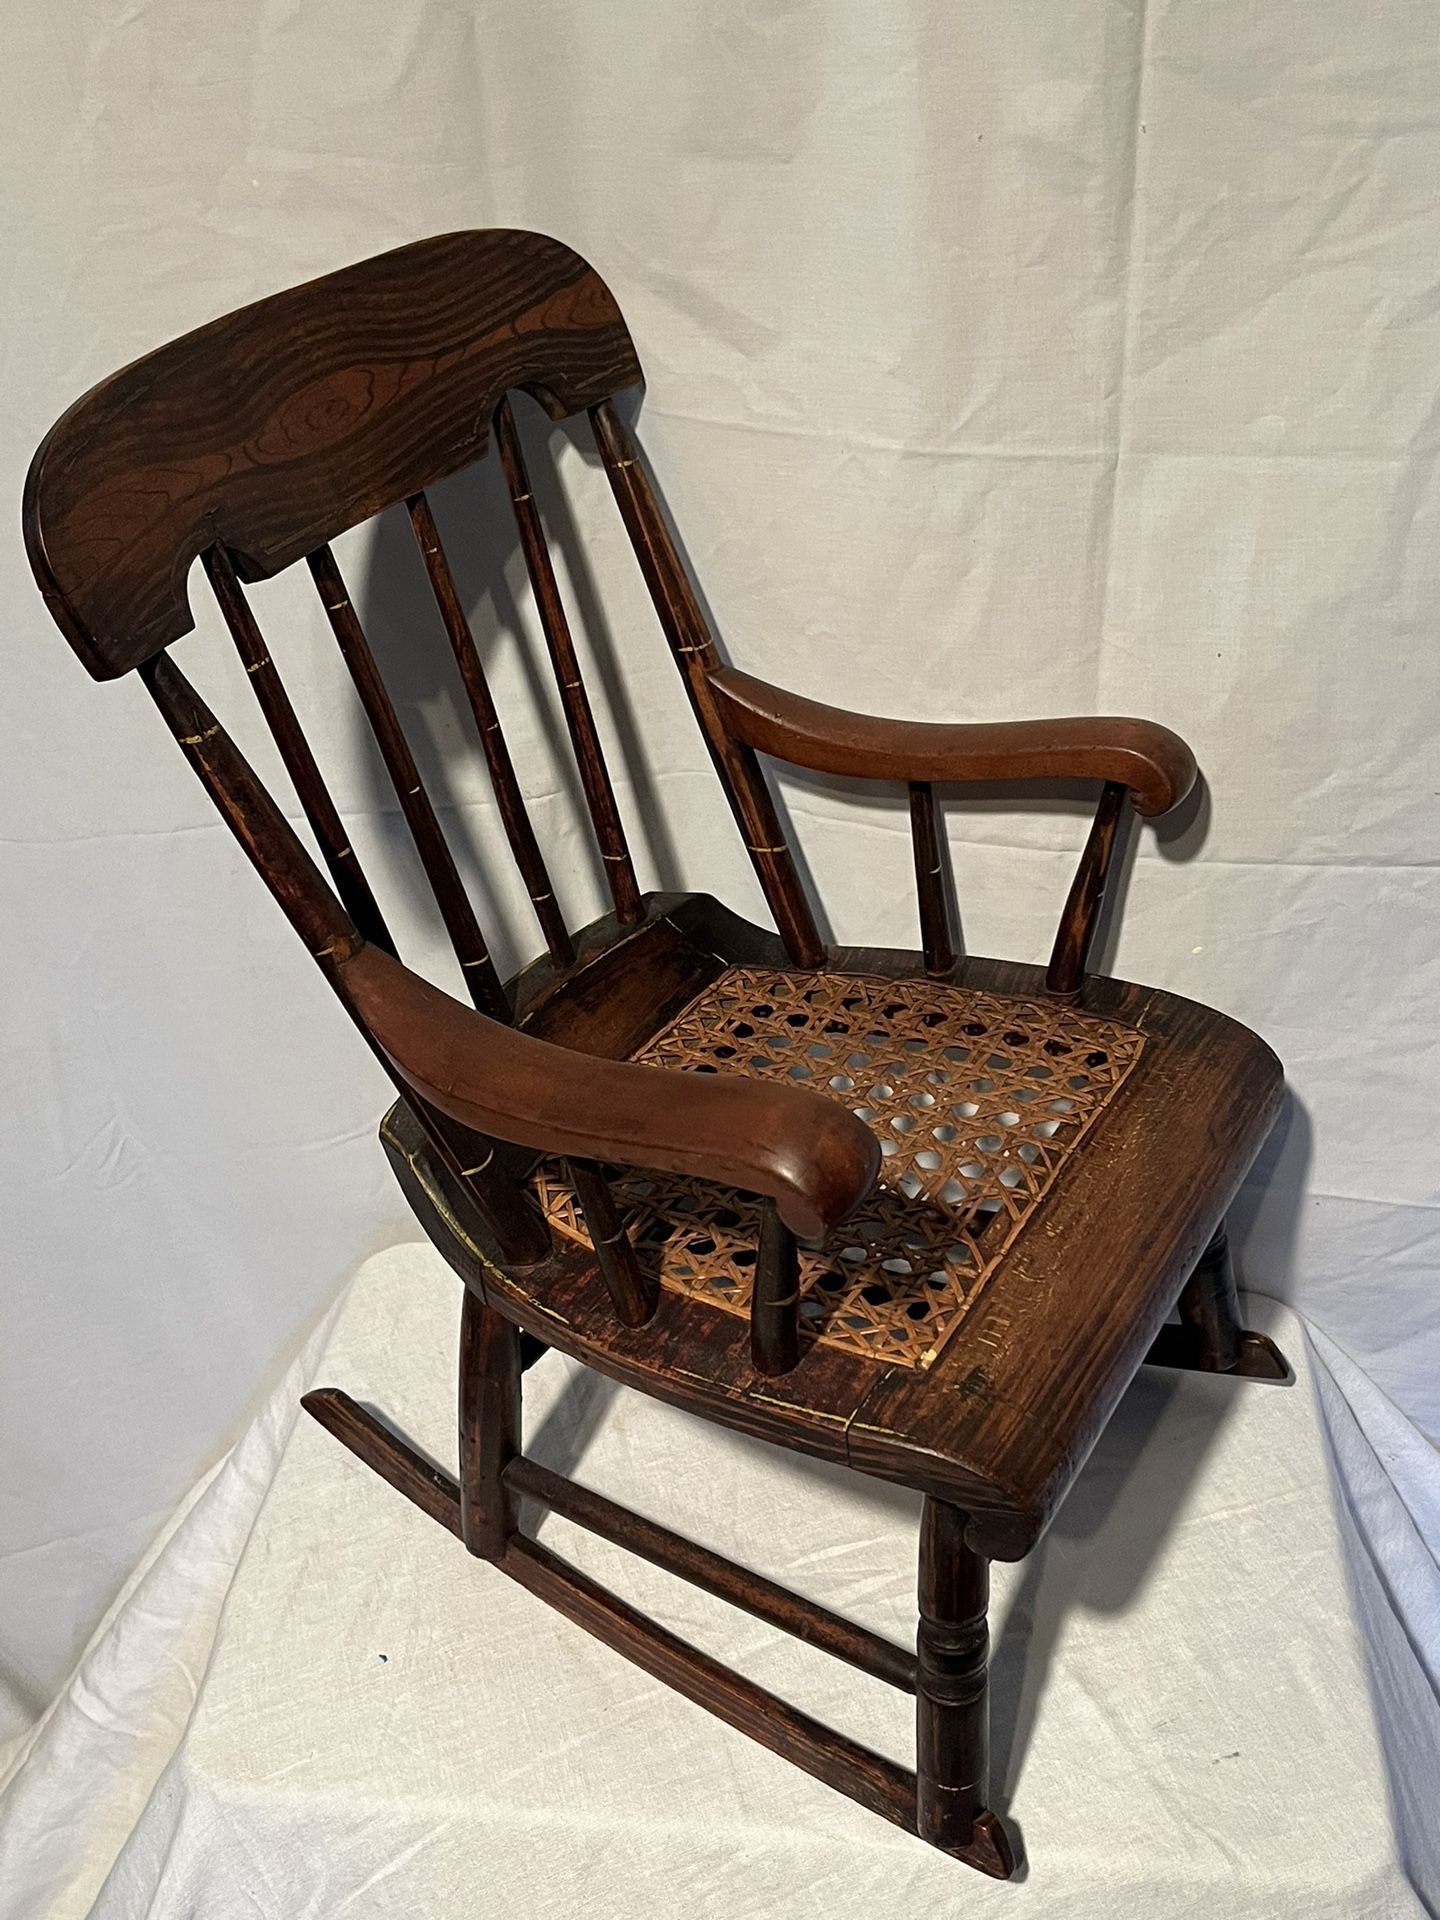 Antique Child’s Rocking Chair - Doll Display